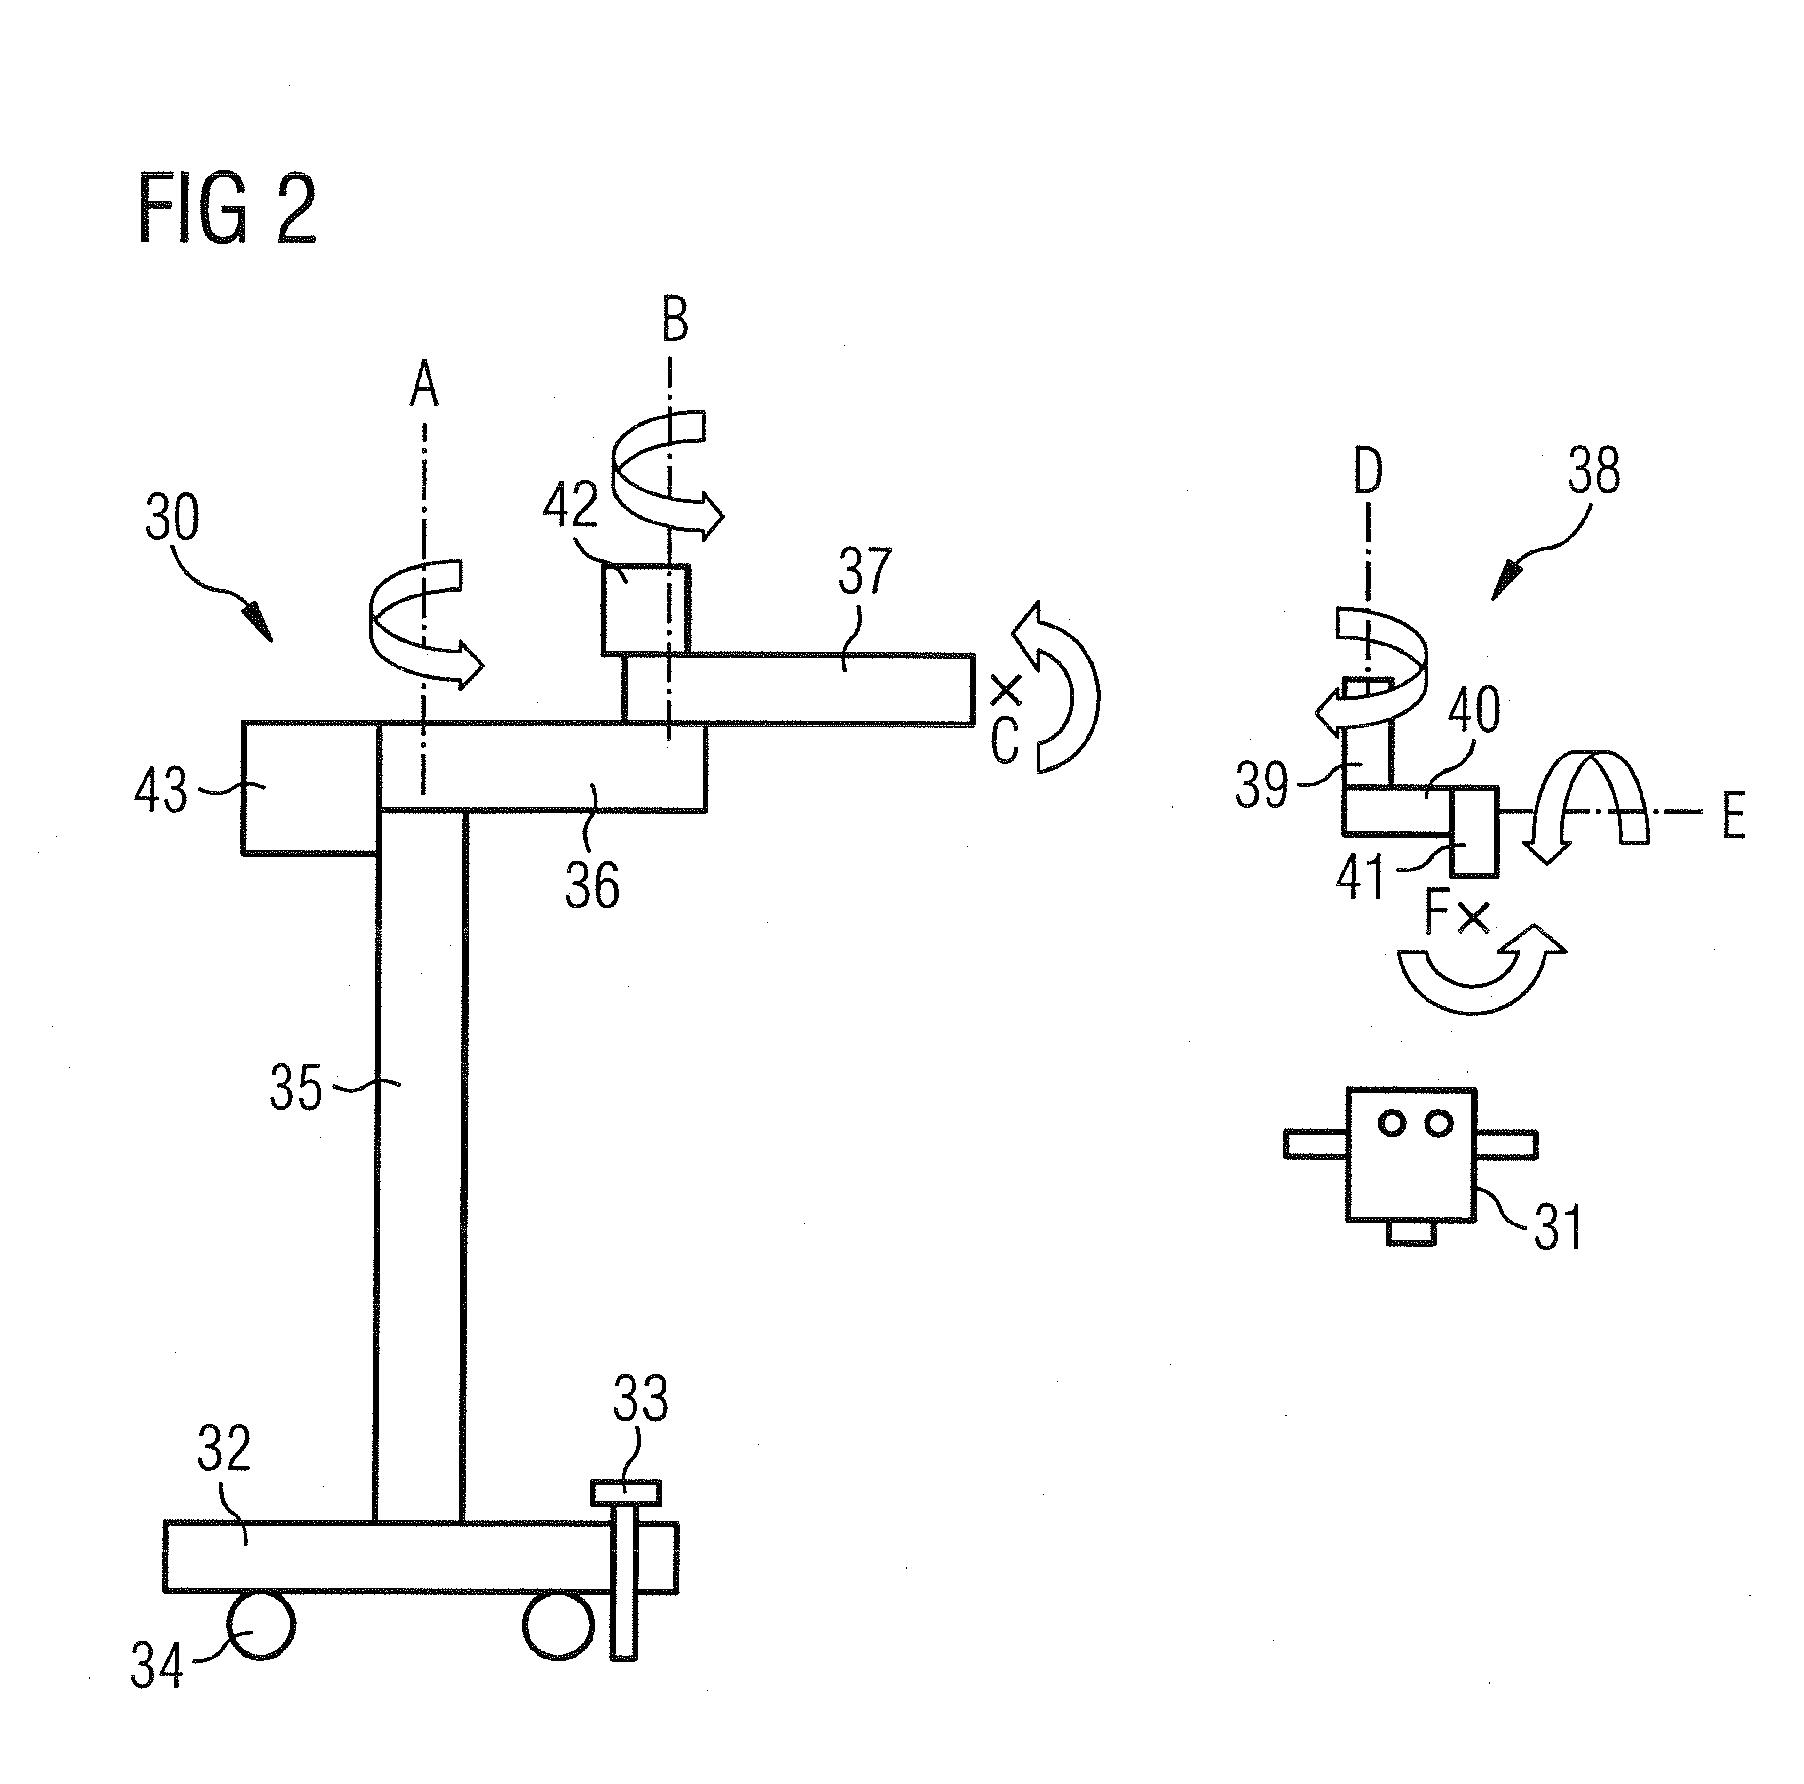 Remote control system for medical apparatus